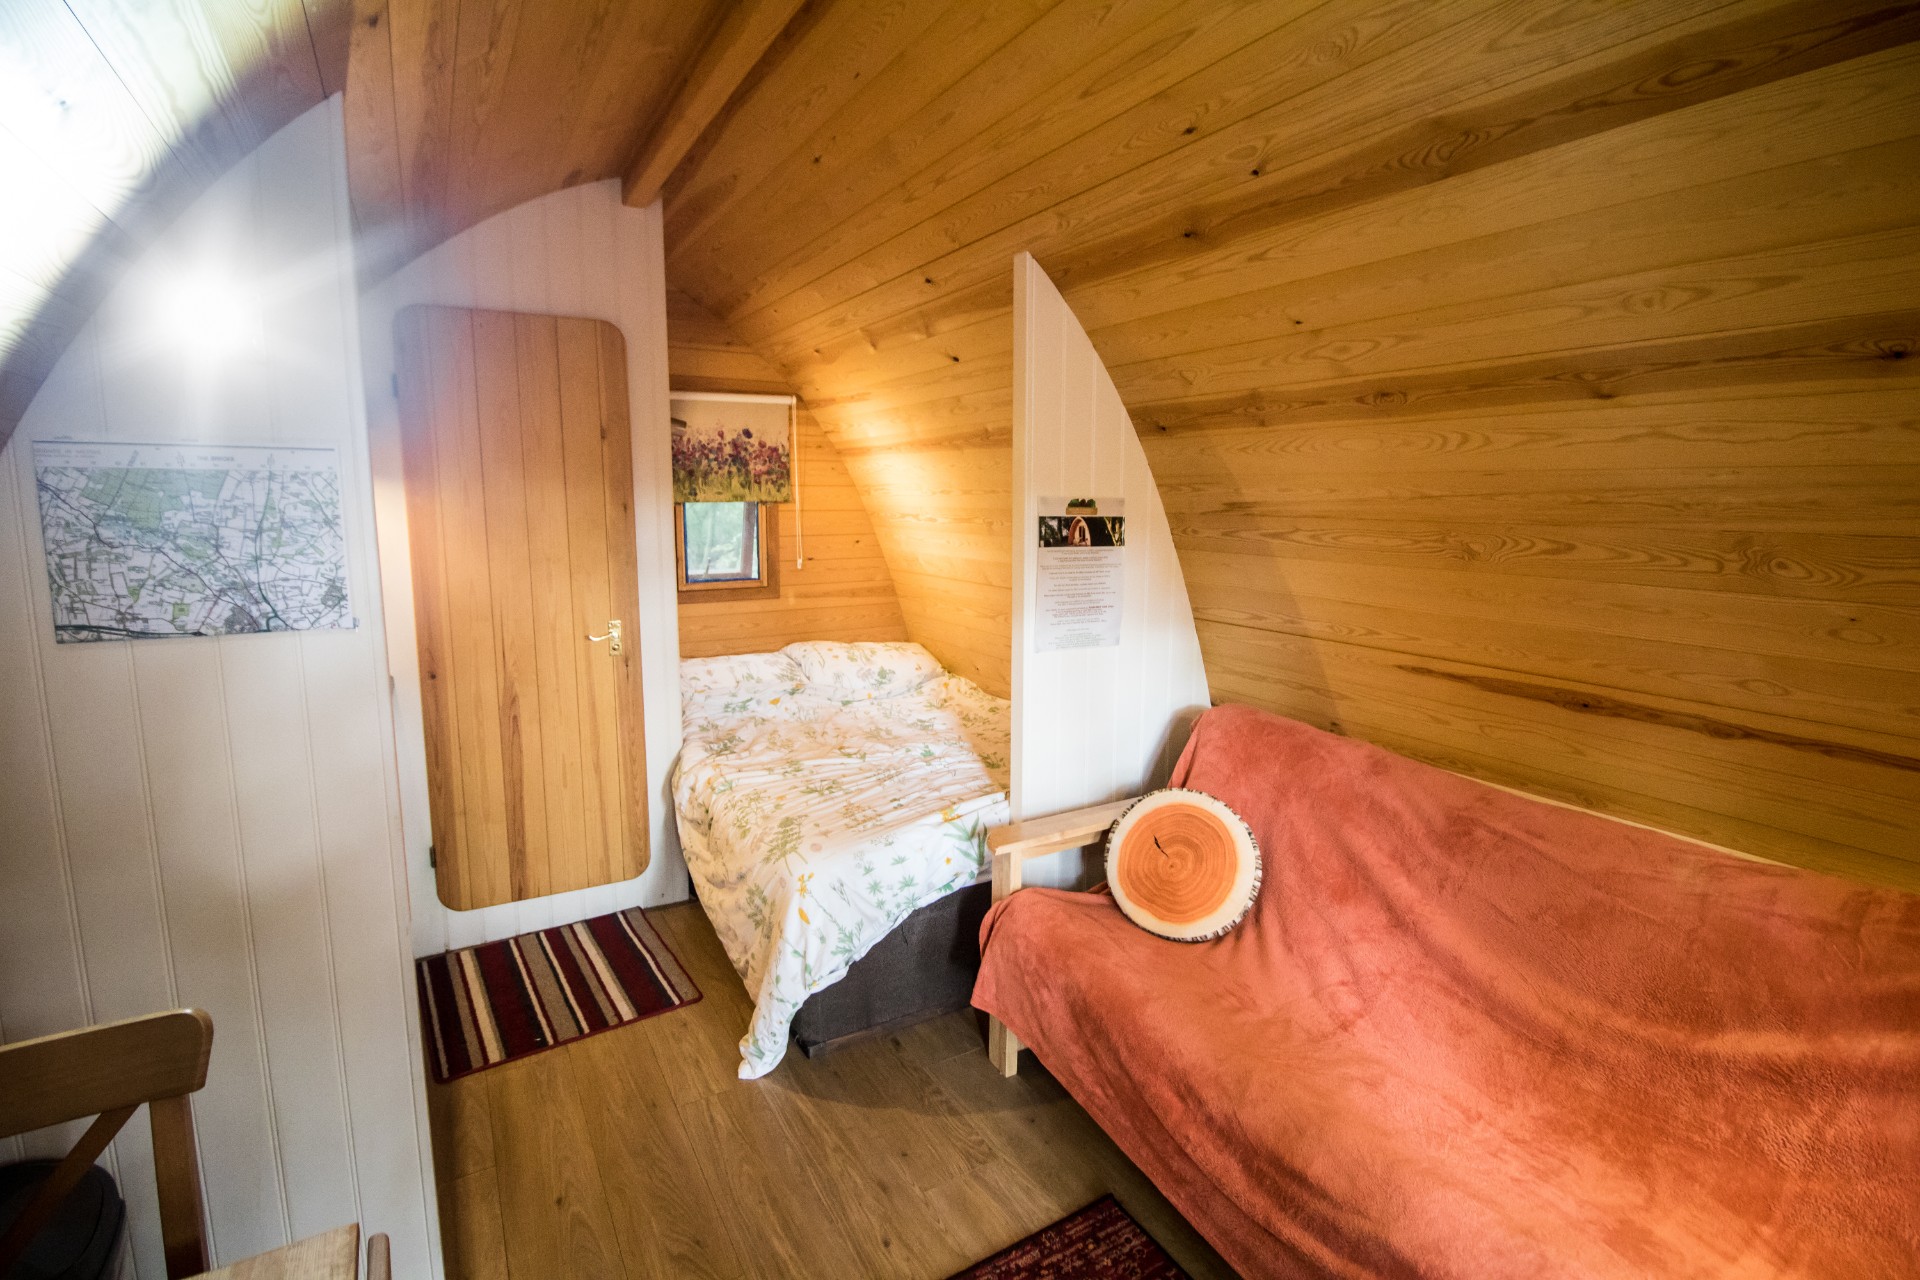 Glamping in a Suffolk Woodland at West Stow Pods. West Stow. Culford. Bury St Edmunds. Suffolk. Cambridge. Cambridgeshire. Anglo Saxon Village and Lakes. Mega Pod. Quirky, unique accommodation. Click through to read more...